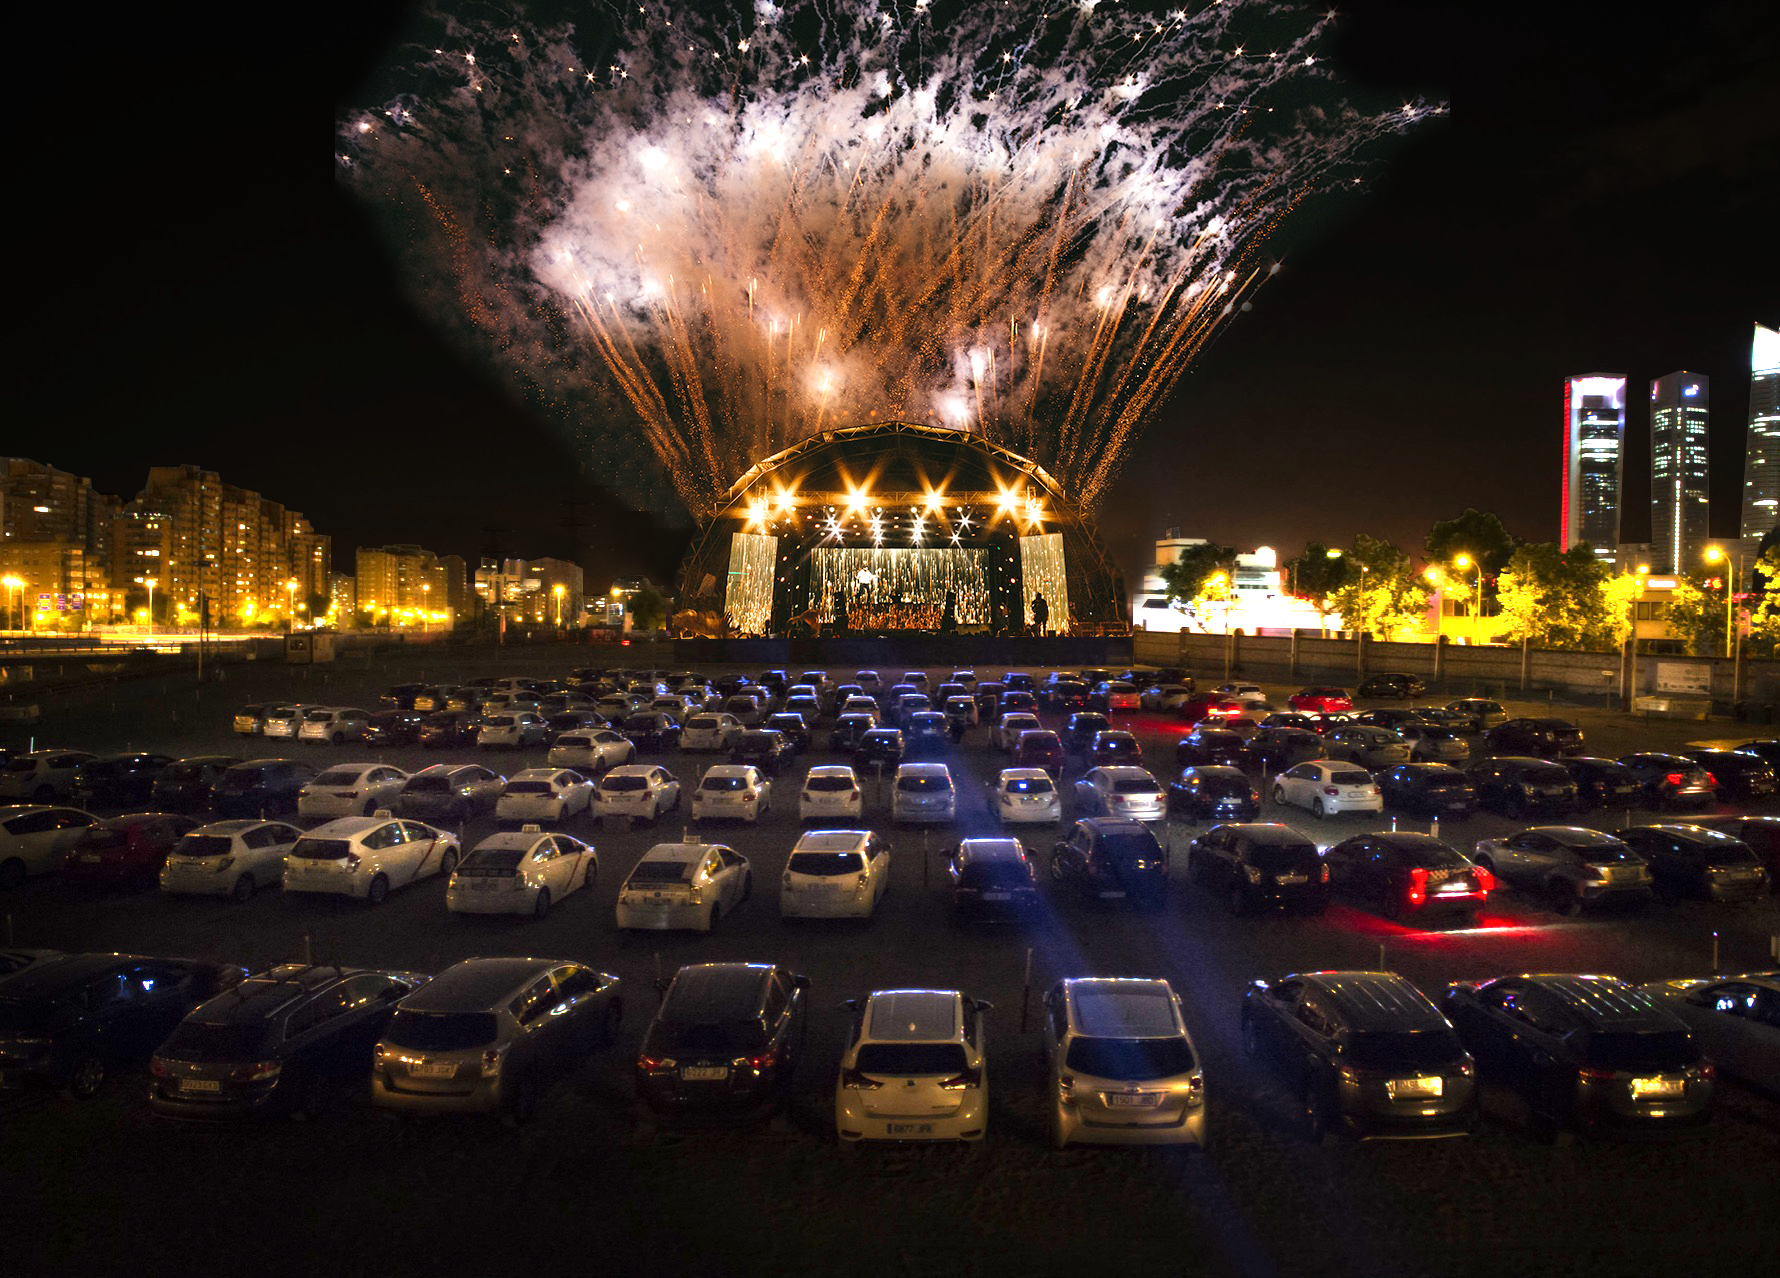   DRIVE-IN ENTERTAINMENT AUSTRALIA   To launch Australia’s first COVIDsafe ‘Drive-In Concert’ DL COMMS insisted on recreating an actual event so the media could see first how live-performances could work in the Coronavirus era. Casey Donovan was used